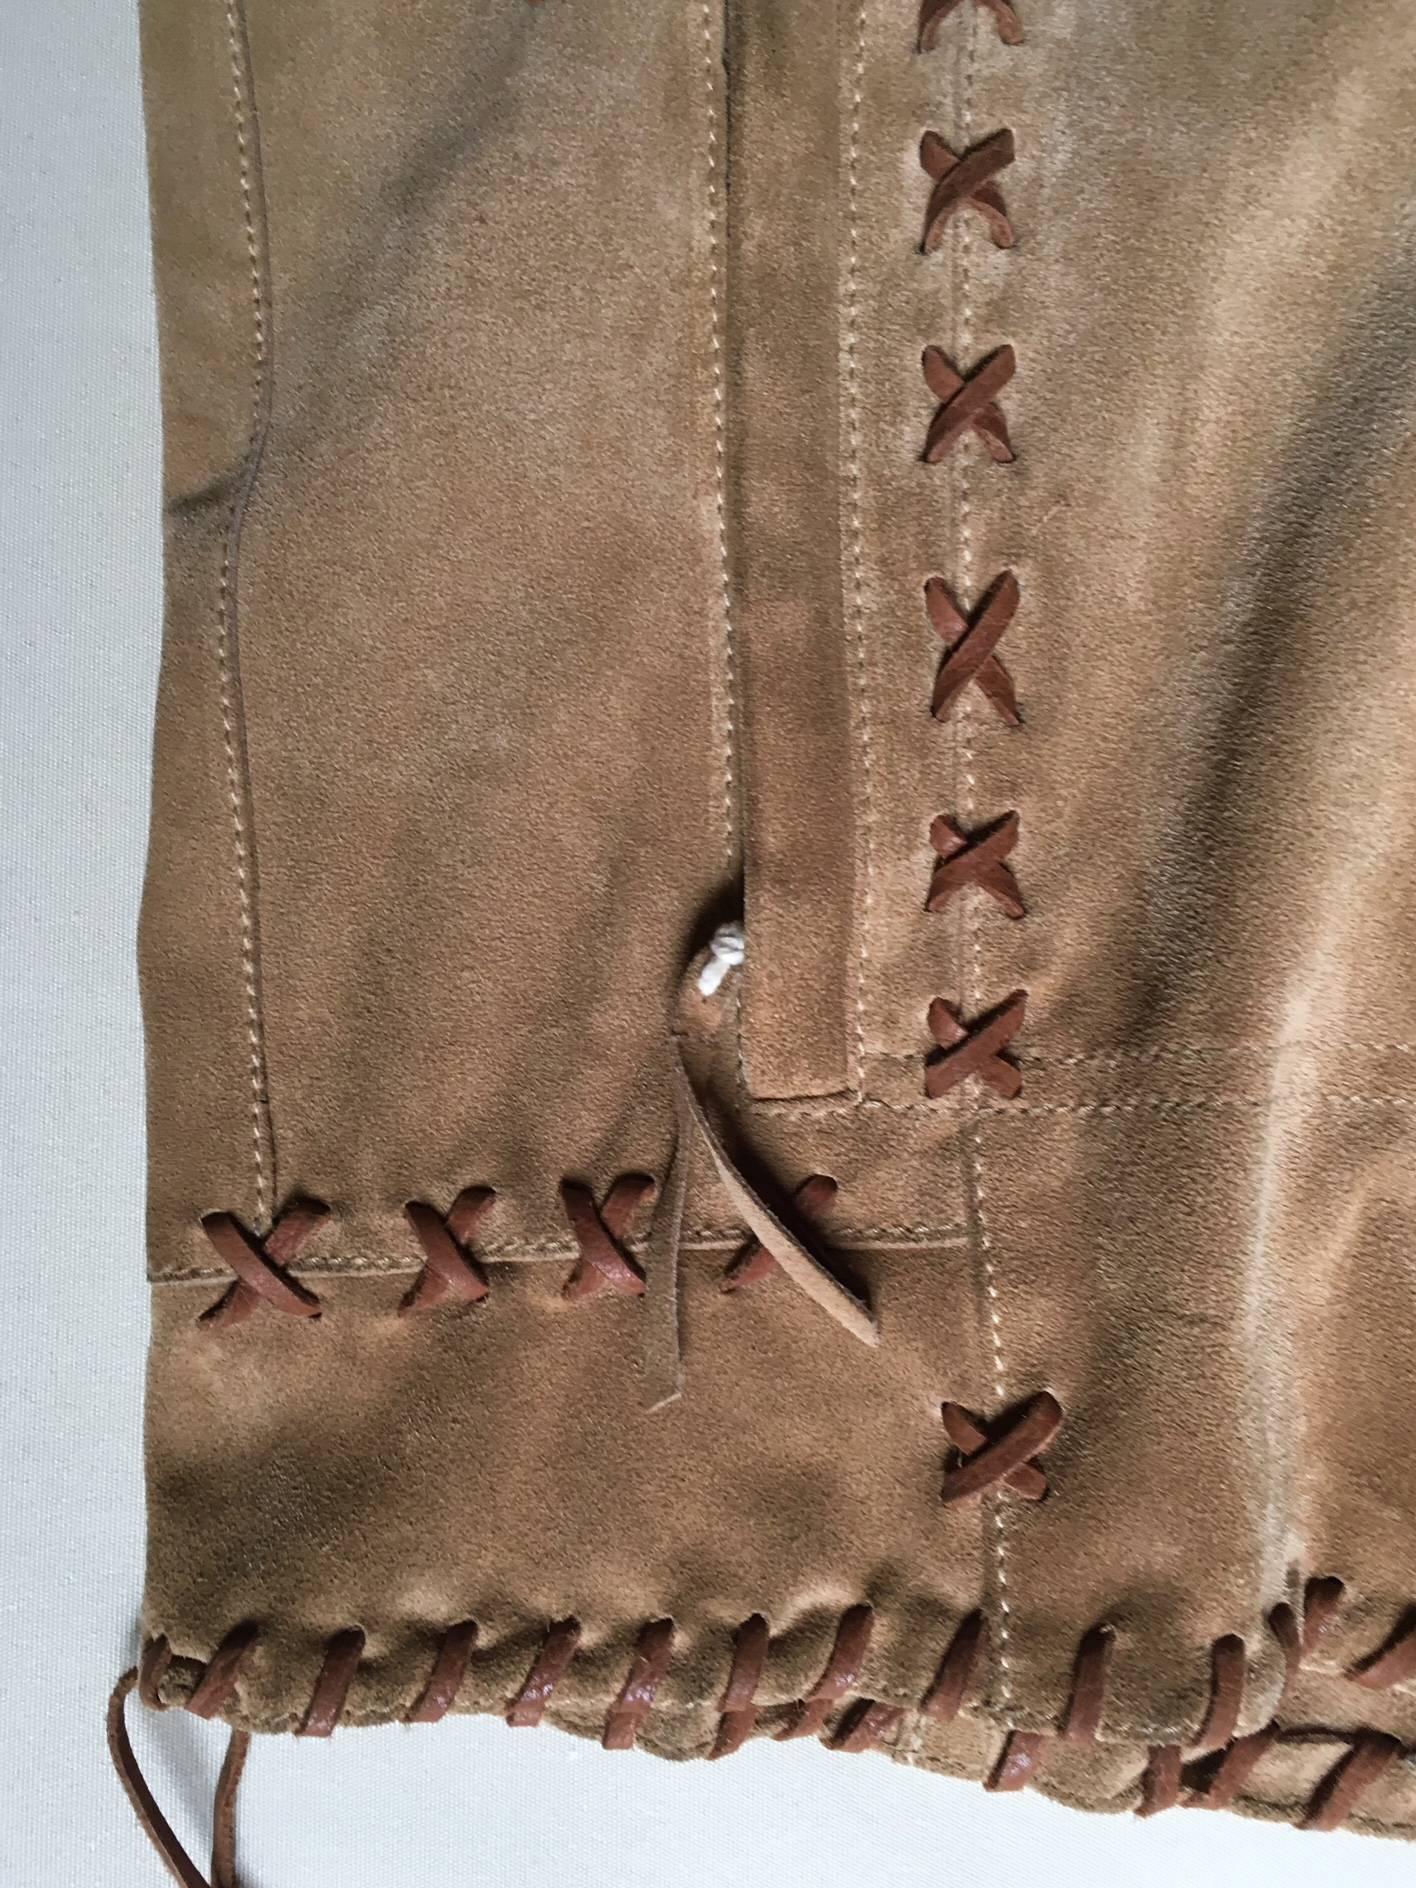 A Dolce & Gabbana Buffalo Tribe calf suede leather jacket ,with many top stitching details for an iconic Western chic  and vintage look.
Size marked 52 (italian/european) equal to 42 (large) USA.
Unworn, Never Used 